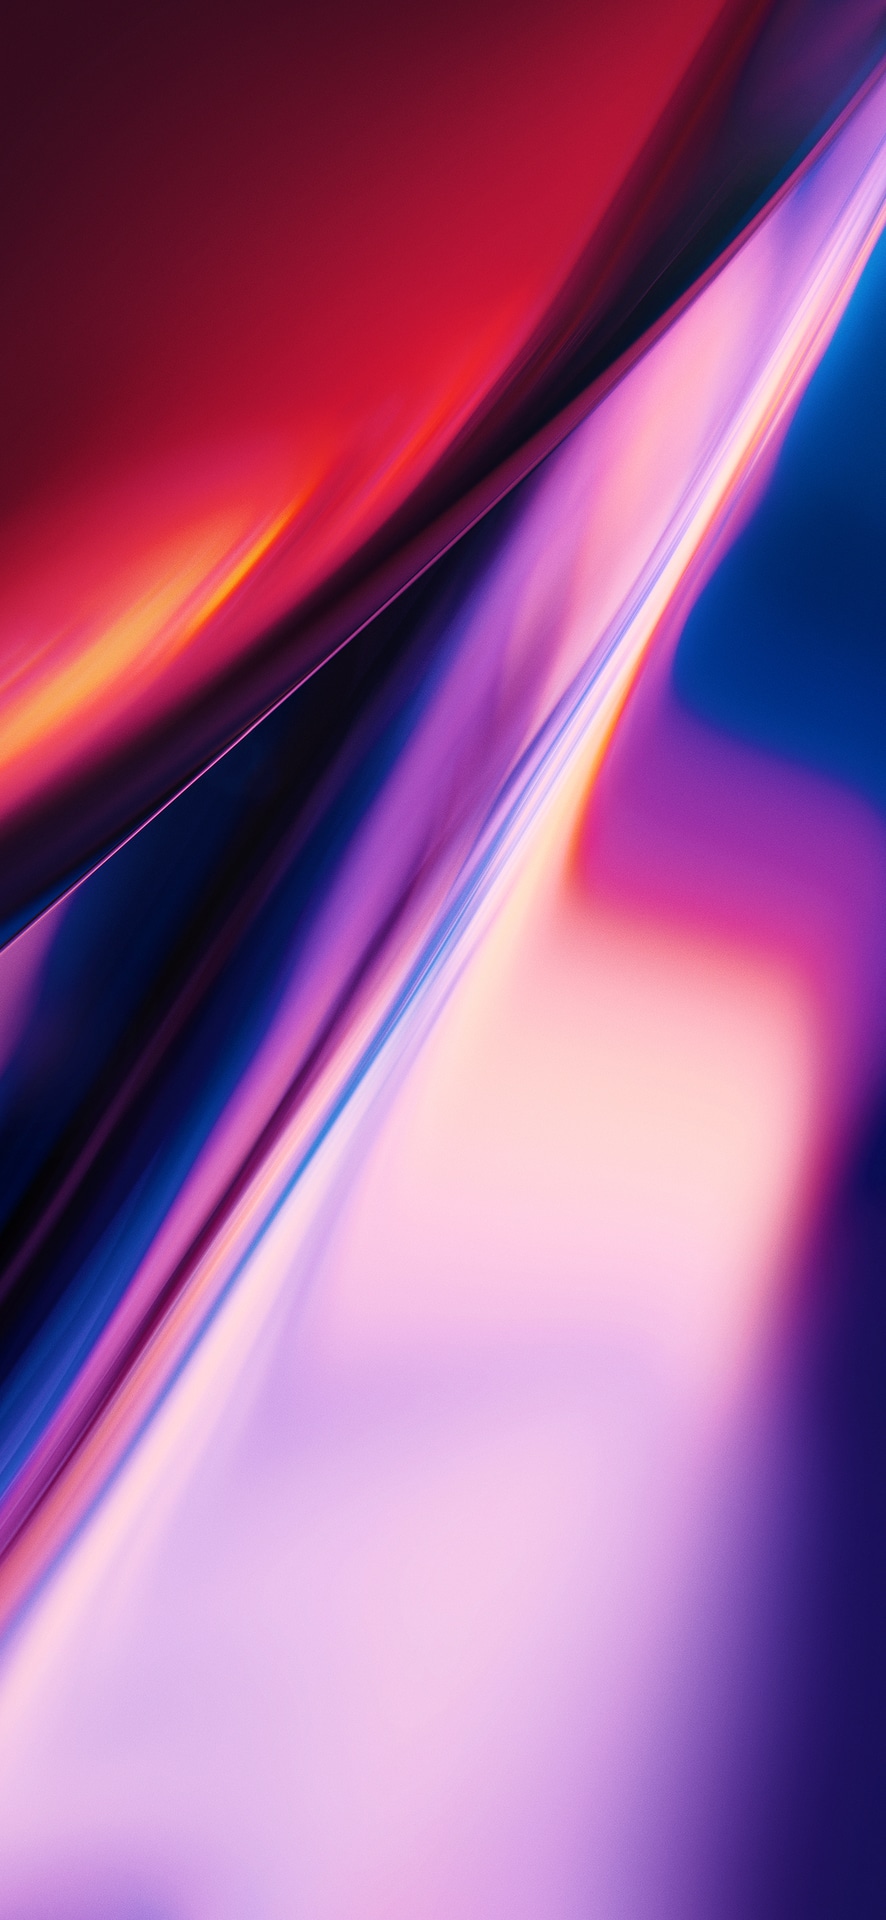 OnePlus wallpapers: Get all your favorites ones here - Android Authority